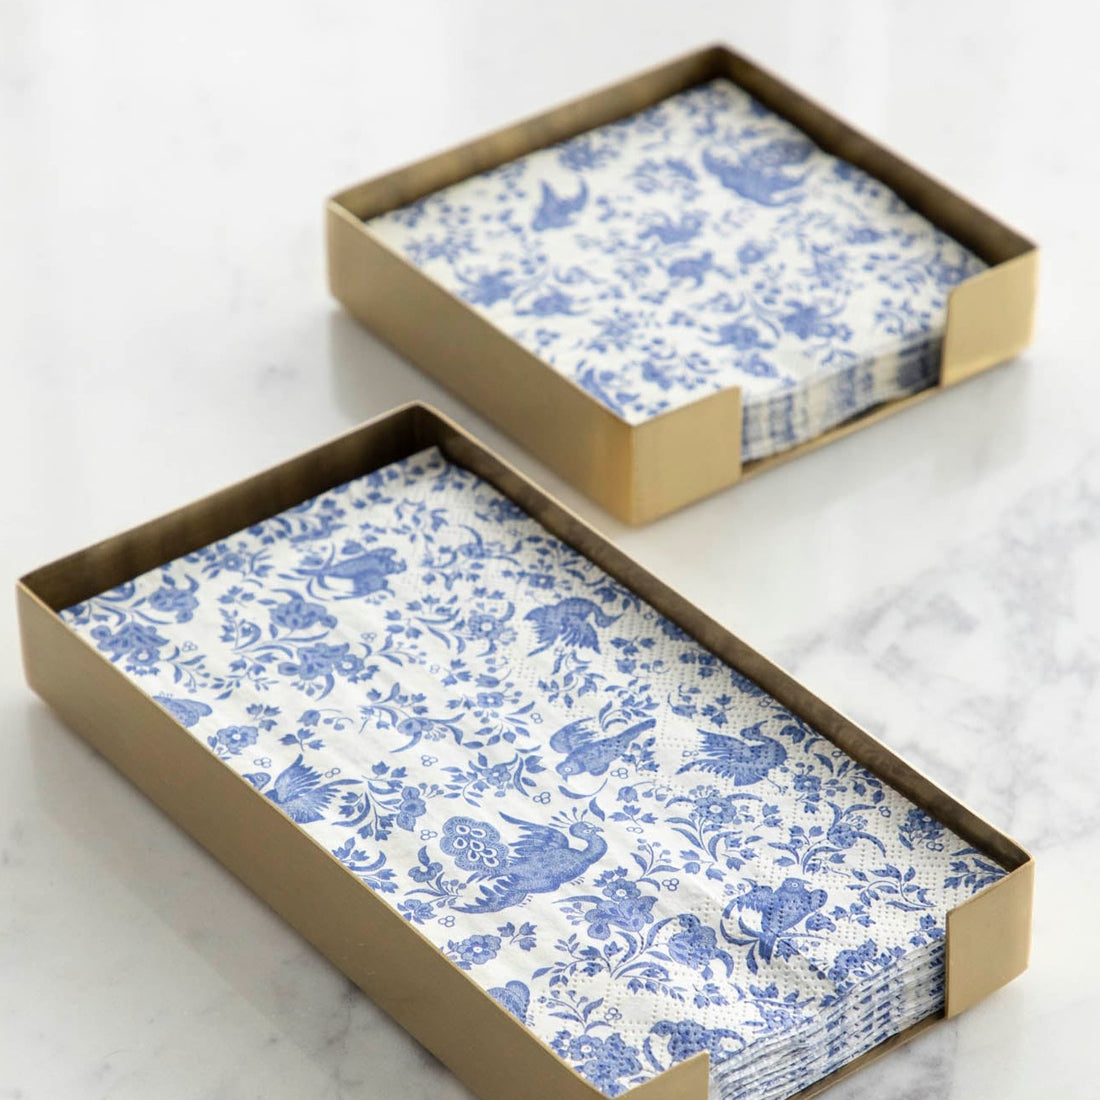 Two Brass Napkin Holders, guest-sized and cocktail-sized, containing blue and white napkins on a white table.